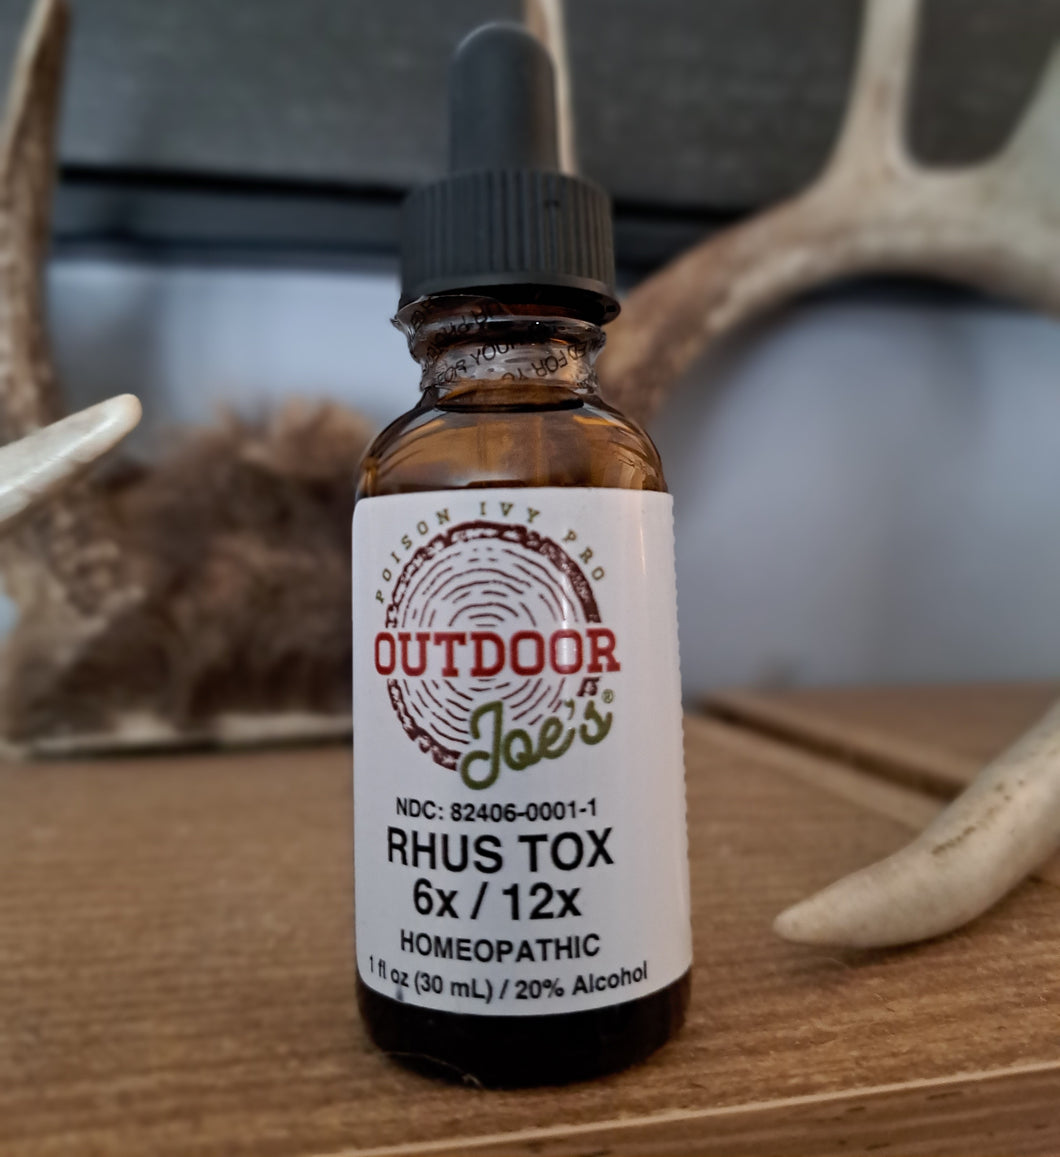 Outdoor Joes Homeopathic Tincture